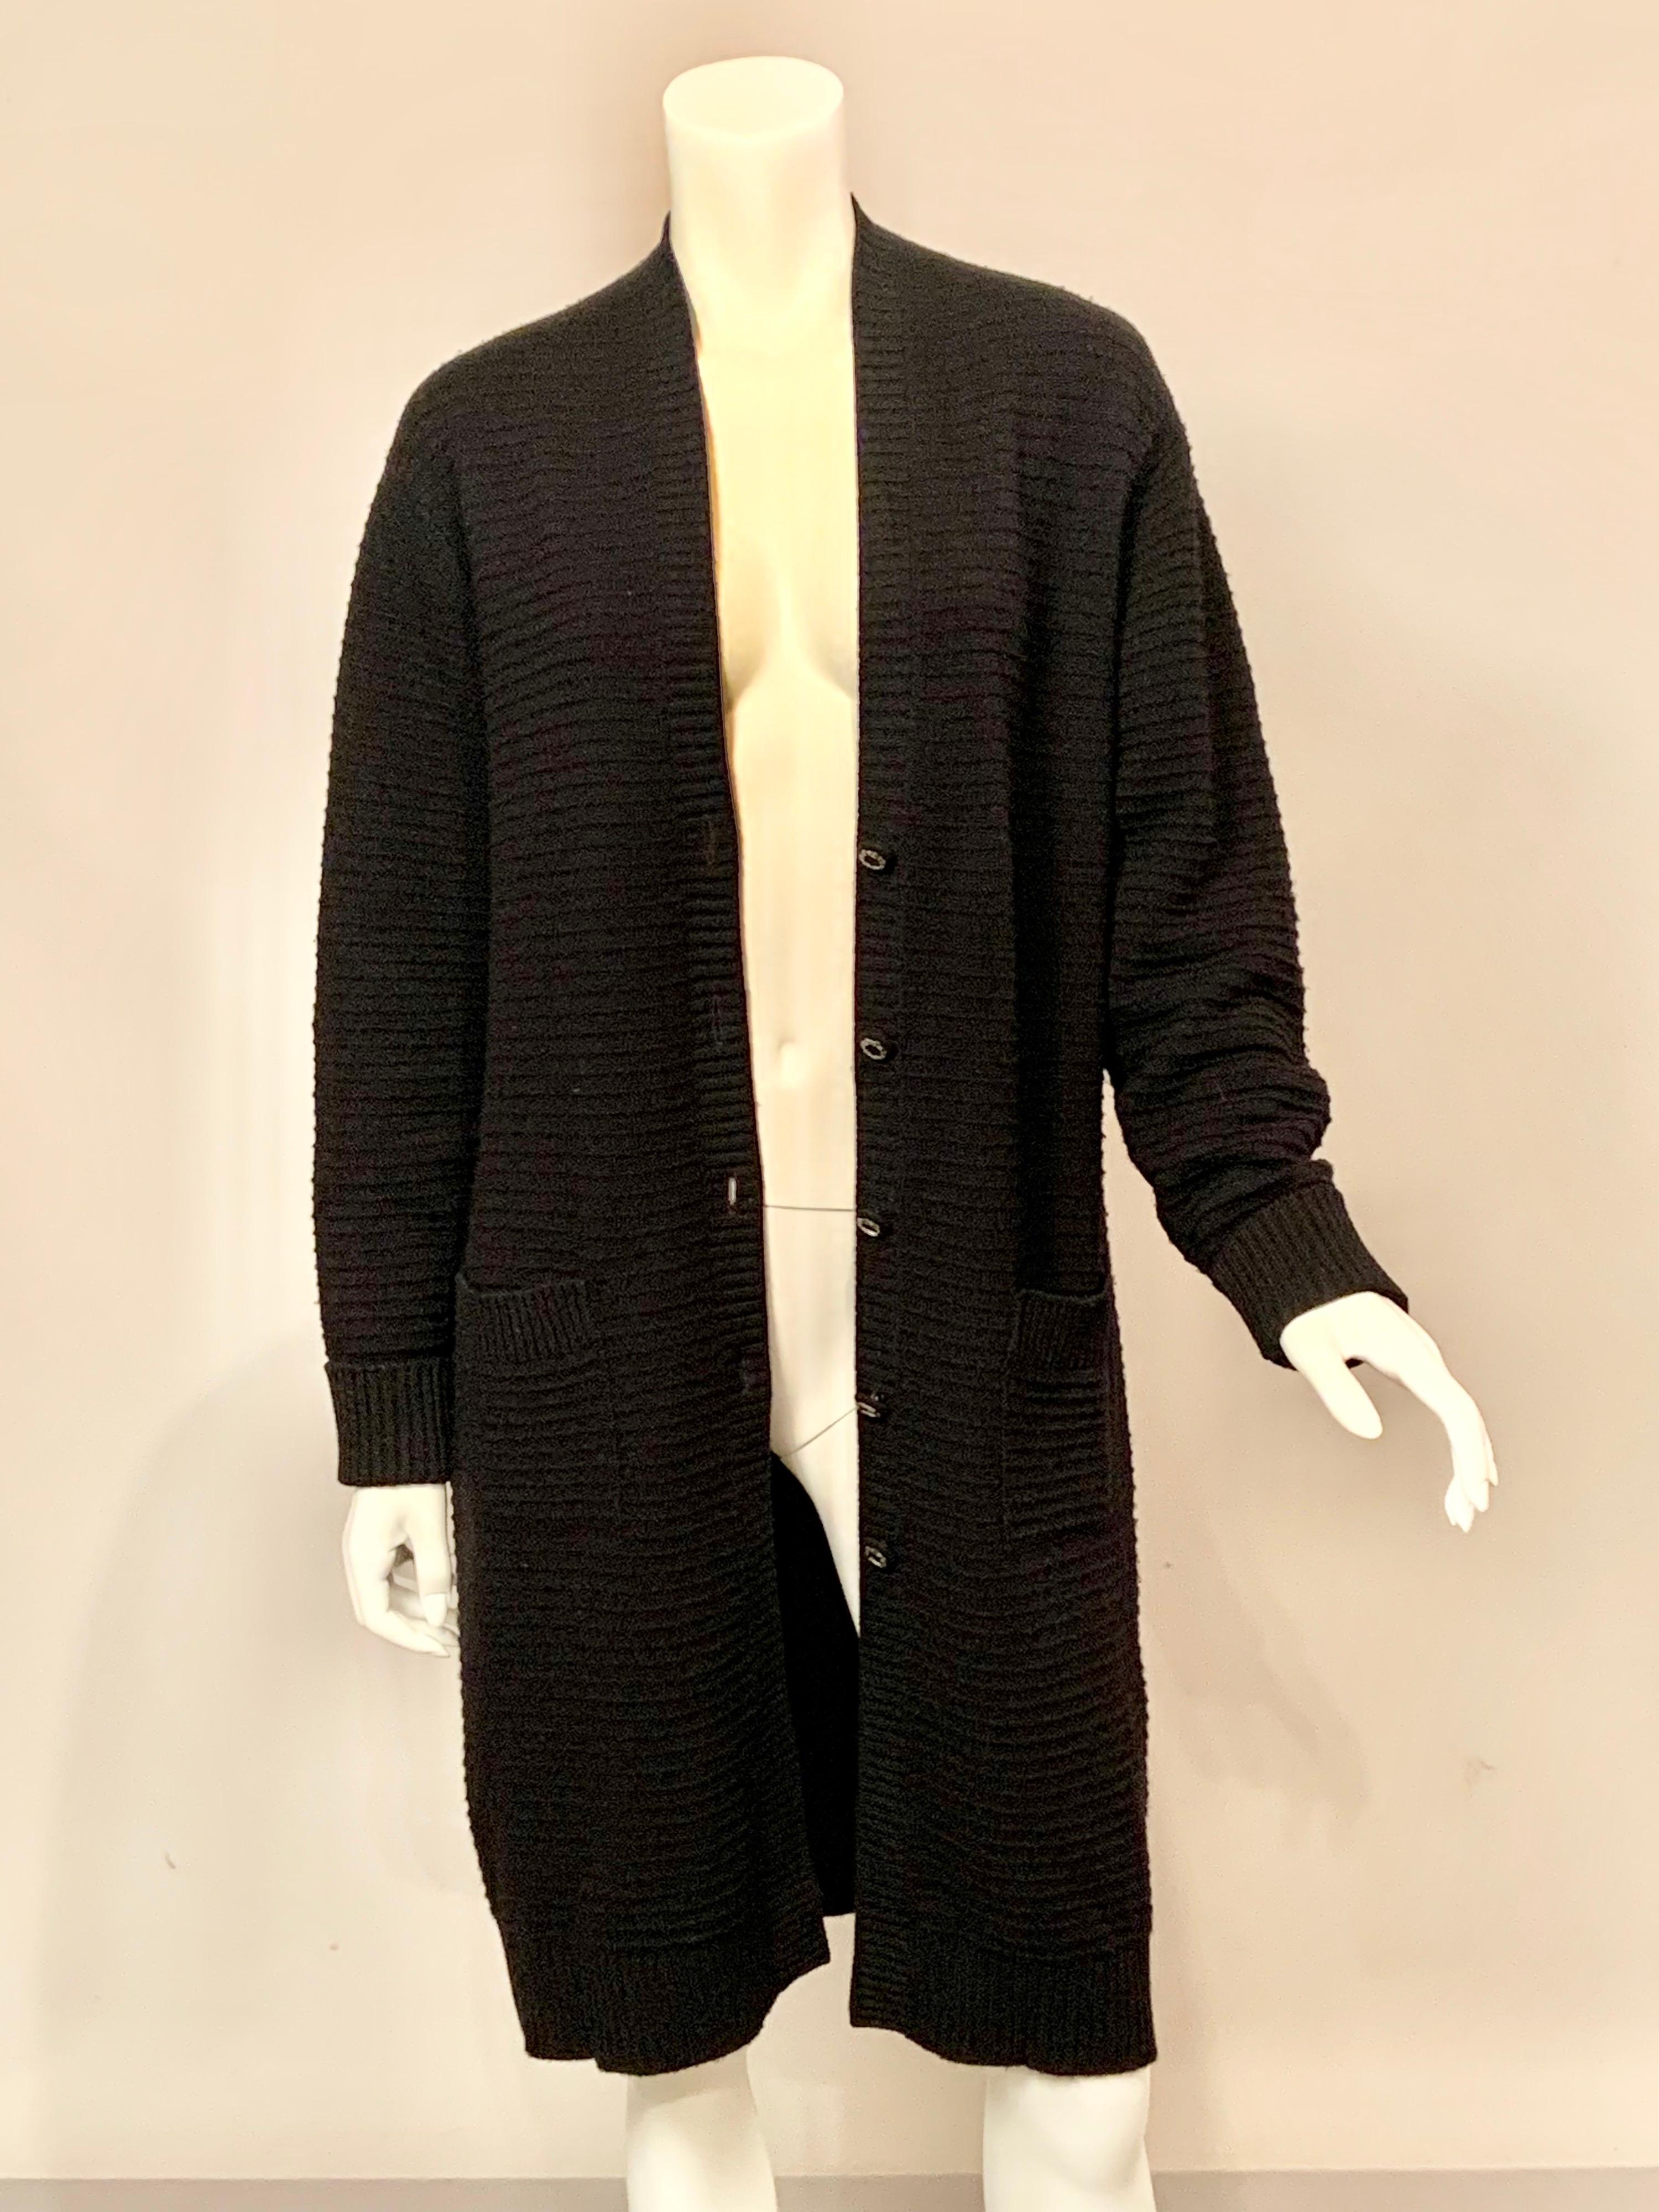 Soft black cashmere in a ribbed knit design is used for this timeless long 1920's inspired cardigan sweater designed 
by Karl Lagerfeld.  It has a V neckline, five Chanel buttons at the center front, and two generous patch pockets. It is in